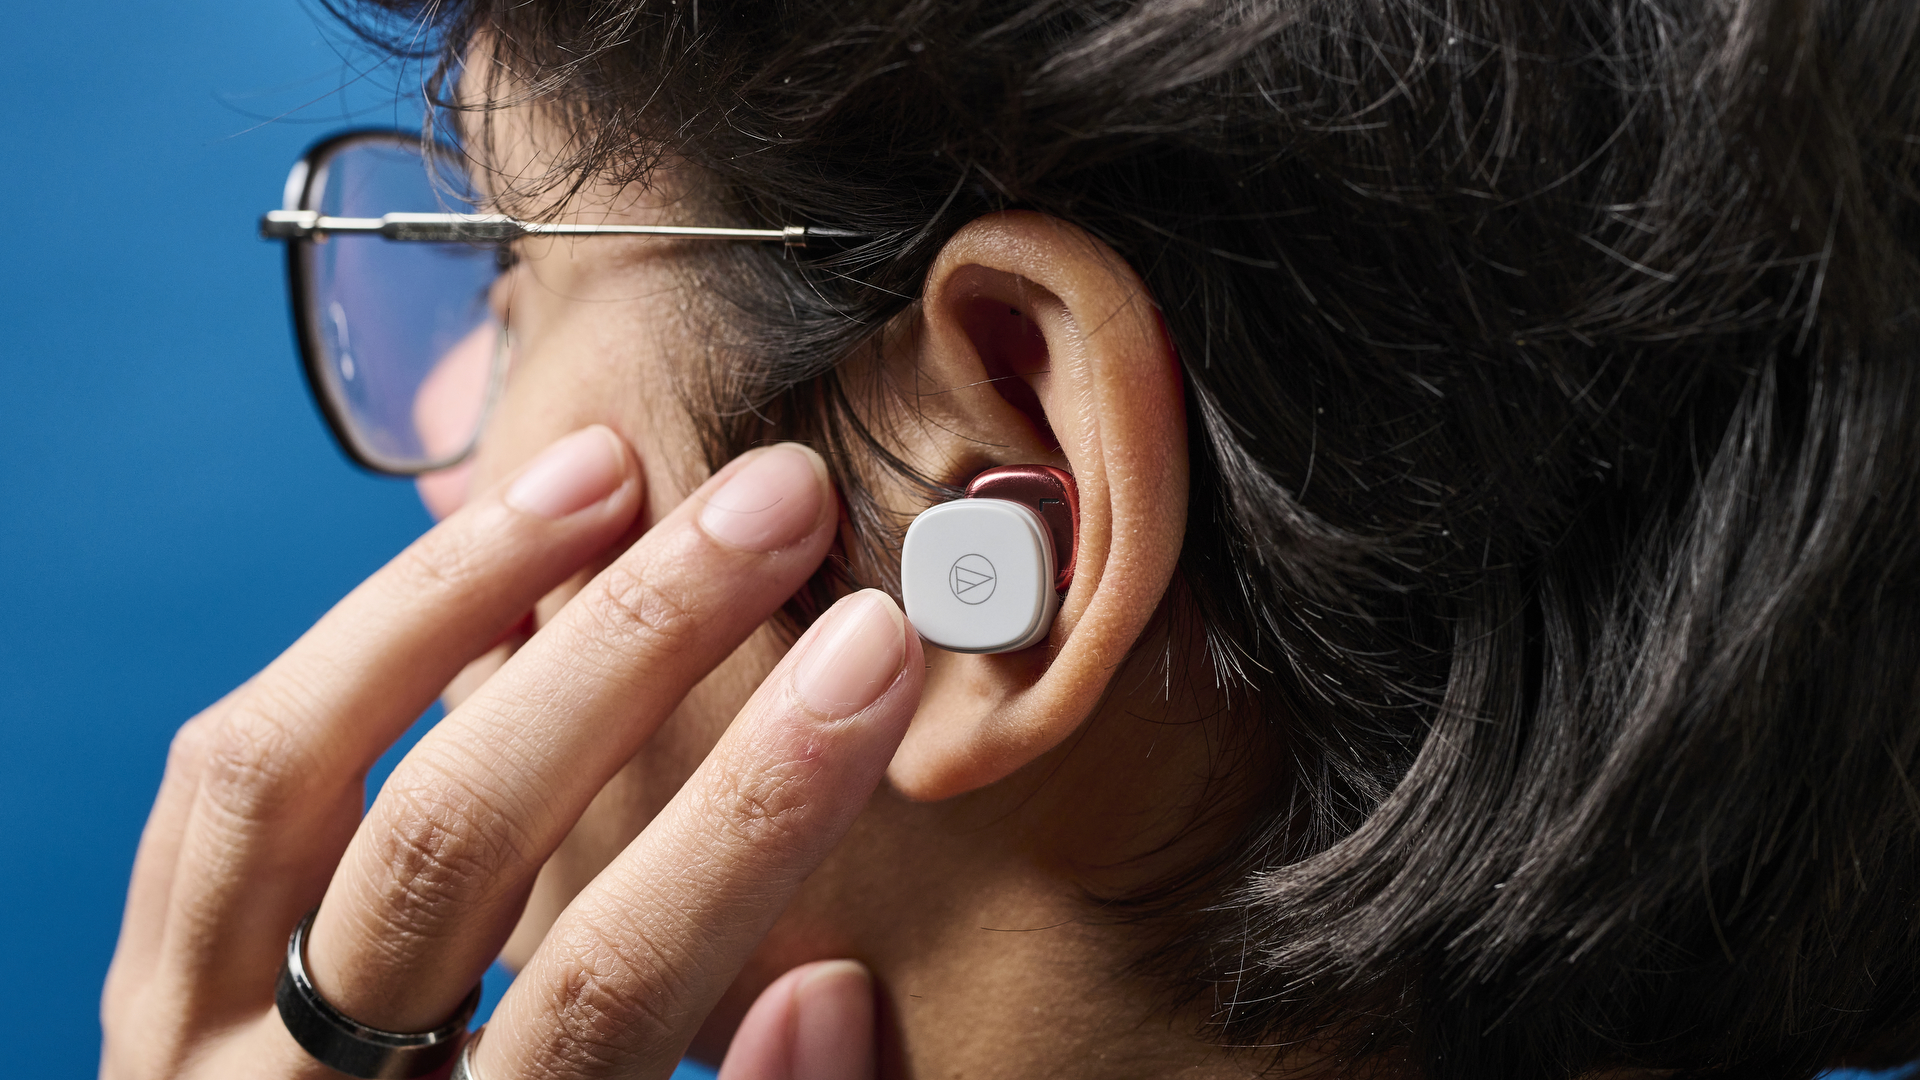 A person tapping an Audio-Technica ATH-SQ1TW earbud in their left ear